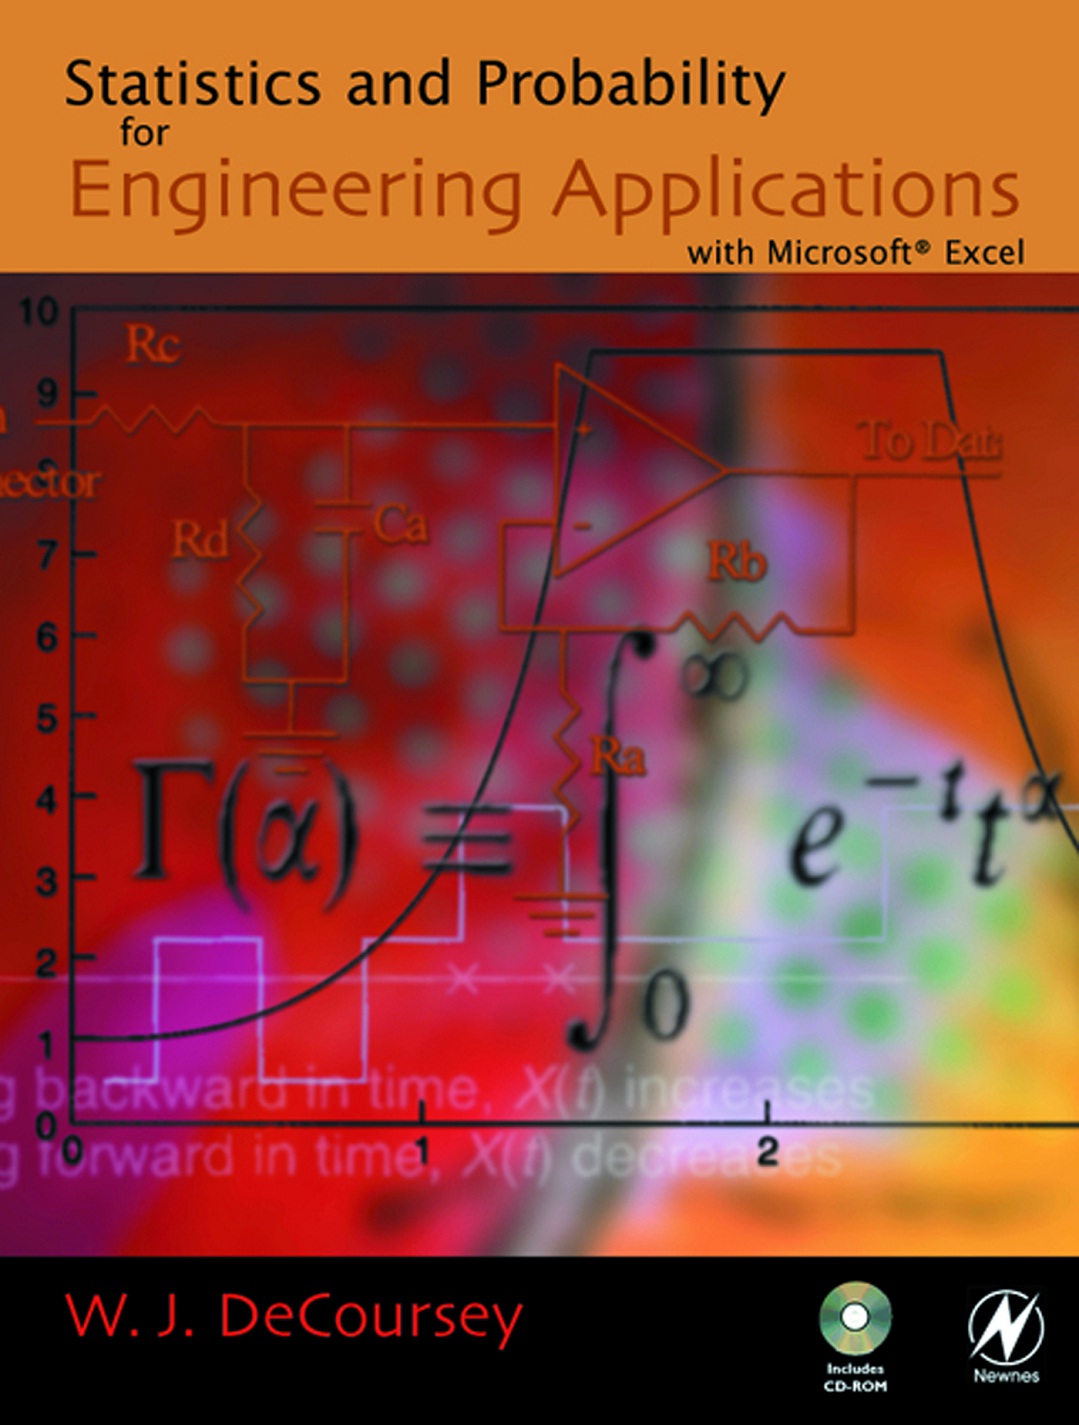 Statistics and Probability for Engineering Applications by W.J.DeCoursey Free Download